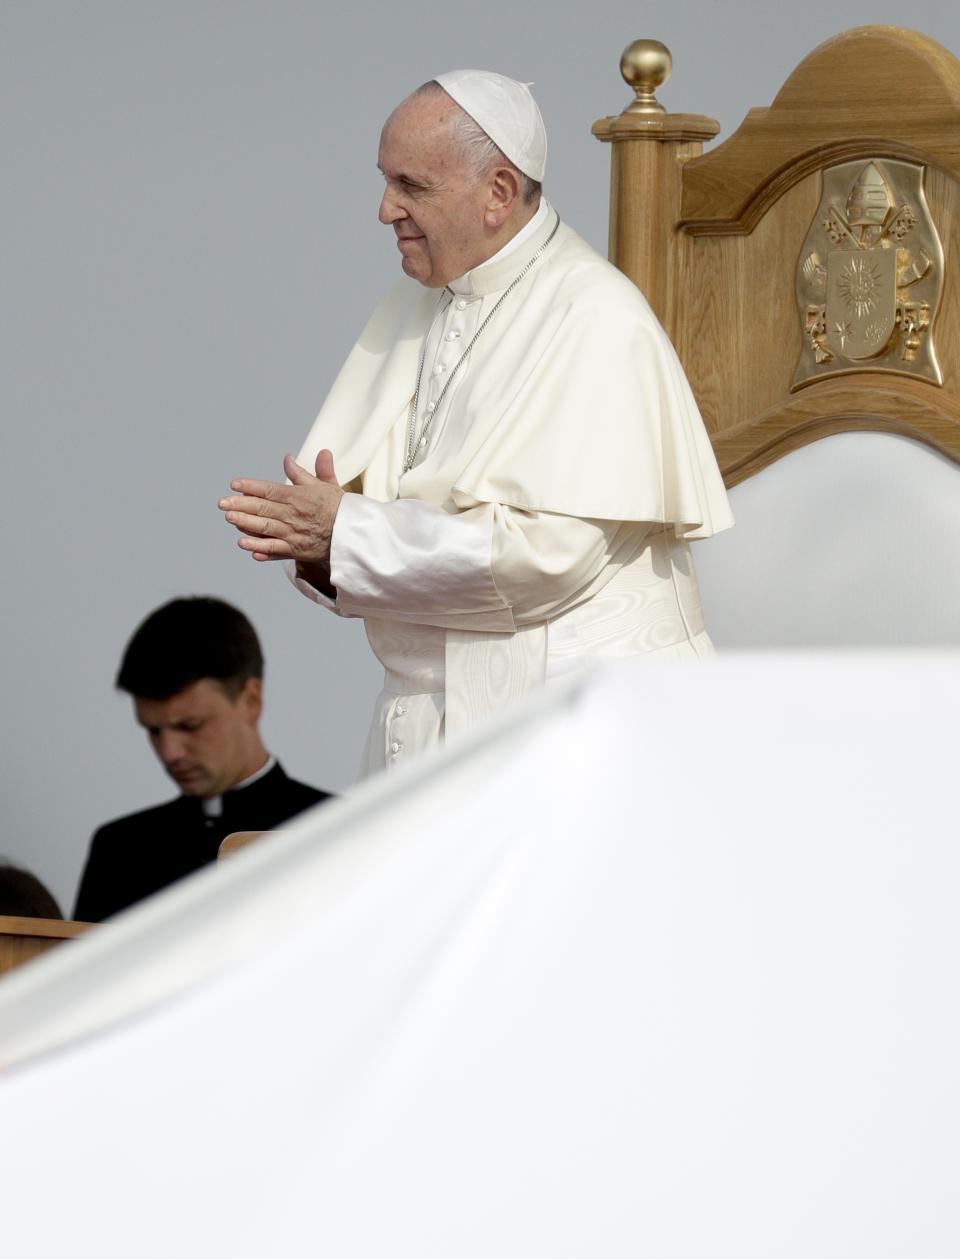 Pope Francis attends a meeting with young people and families, in Iasi, Romania, Saturday, June 1, 2019. Francis began a three-day pilgrimage to Romania on Friday that in many ways is completing the 1999 trip by St. John Paul II that marked the first-ever papal visit to a majority Orthodox country. (AP Photo/Andrew Medichini)